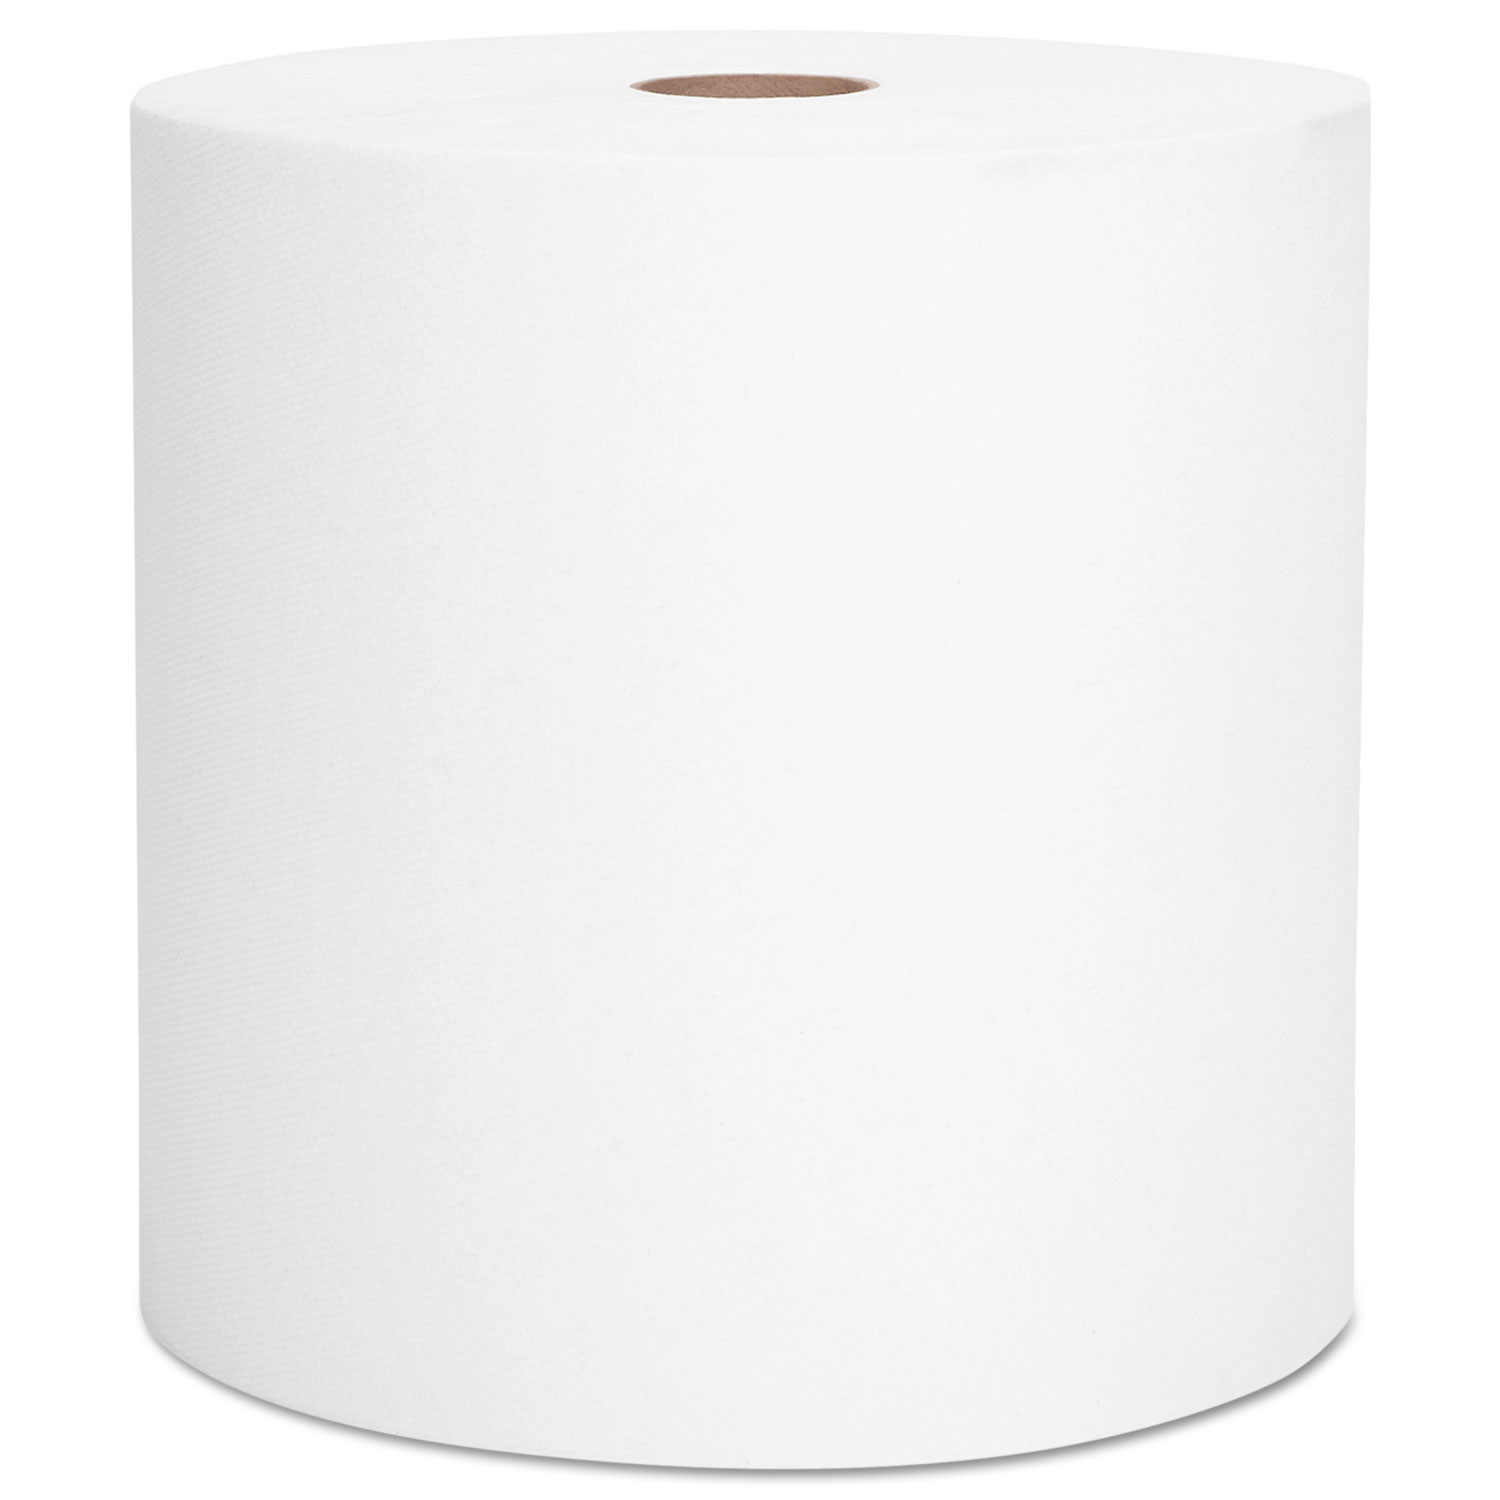 Hard Roll Towels, 1.5 Core, 8 x 800 ft, White